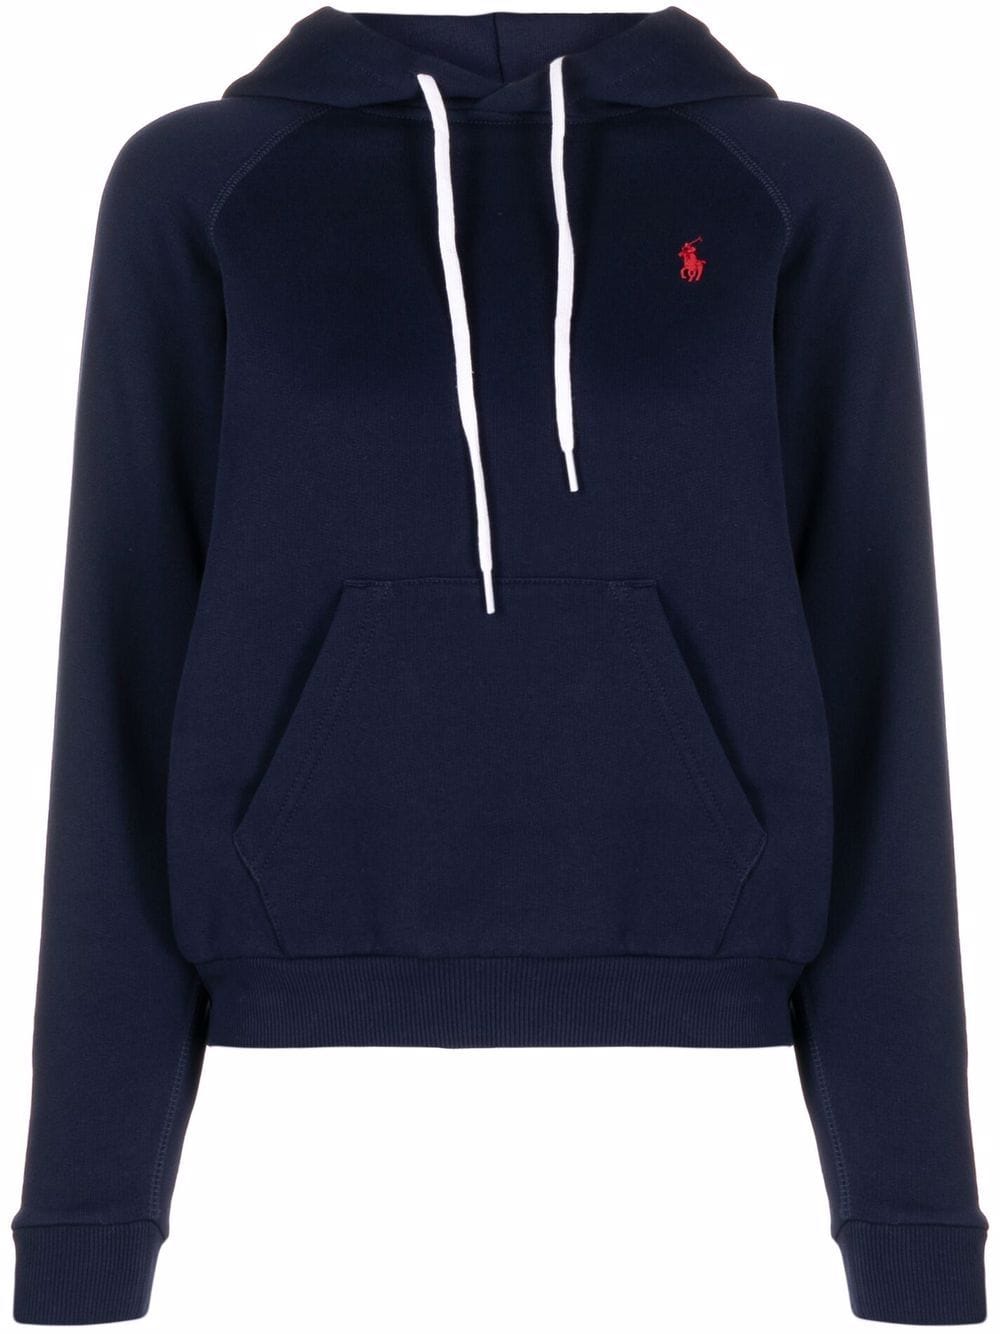 Embroidered-logo hoodie<BR/><BR/><BR/>